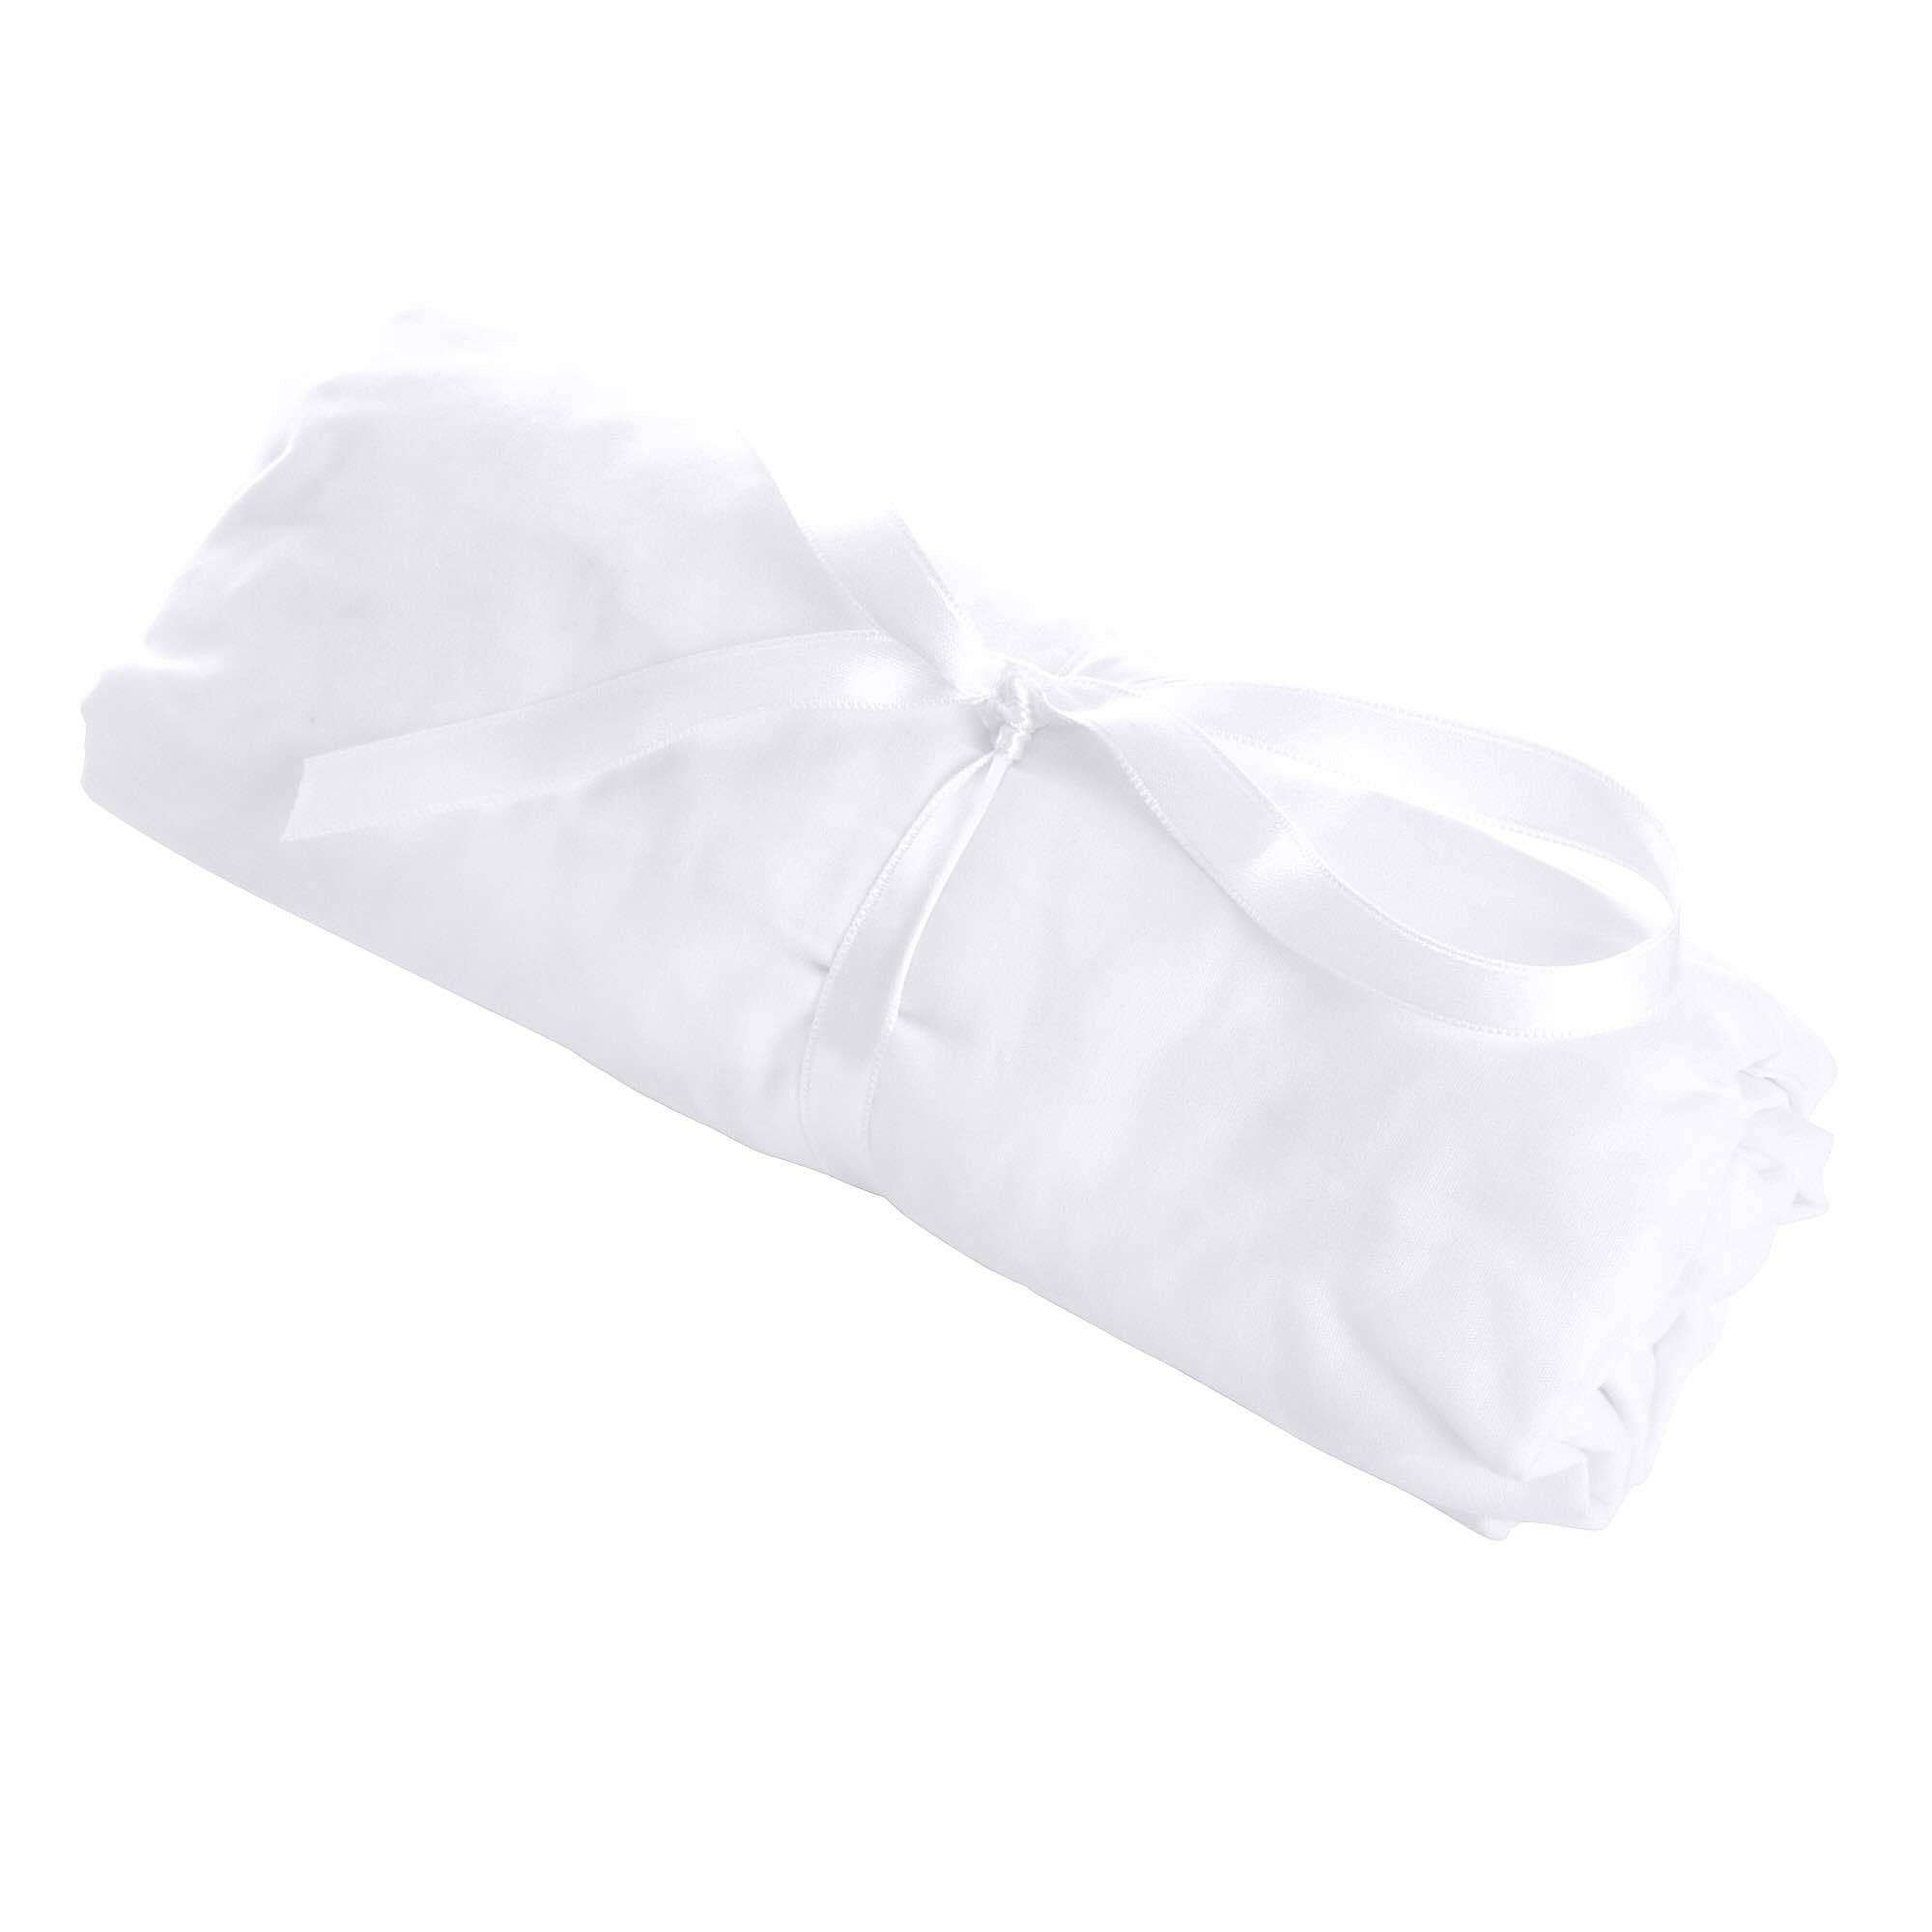 Theophile & Patachou Cot Bed Fitted Sheet 70x140 - Royal White